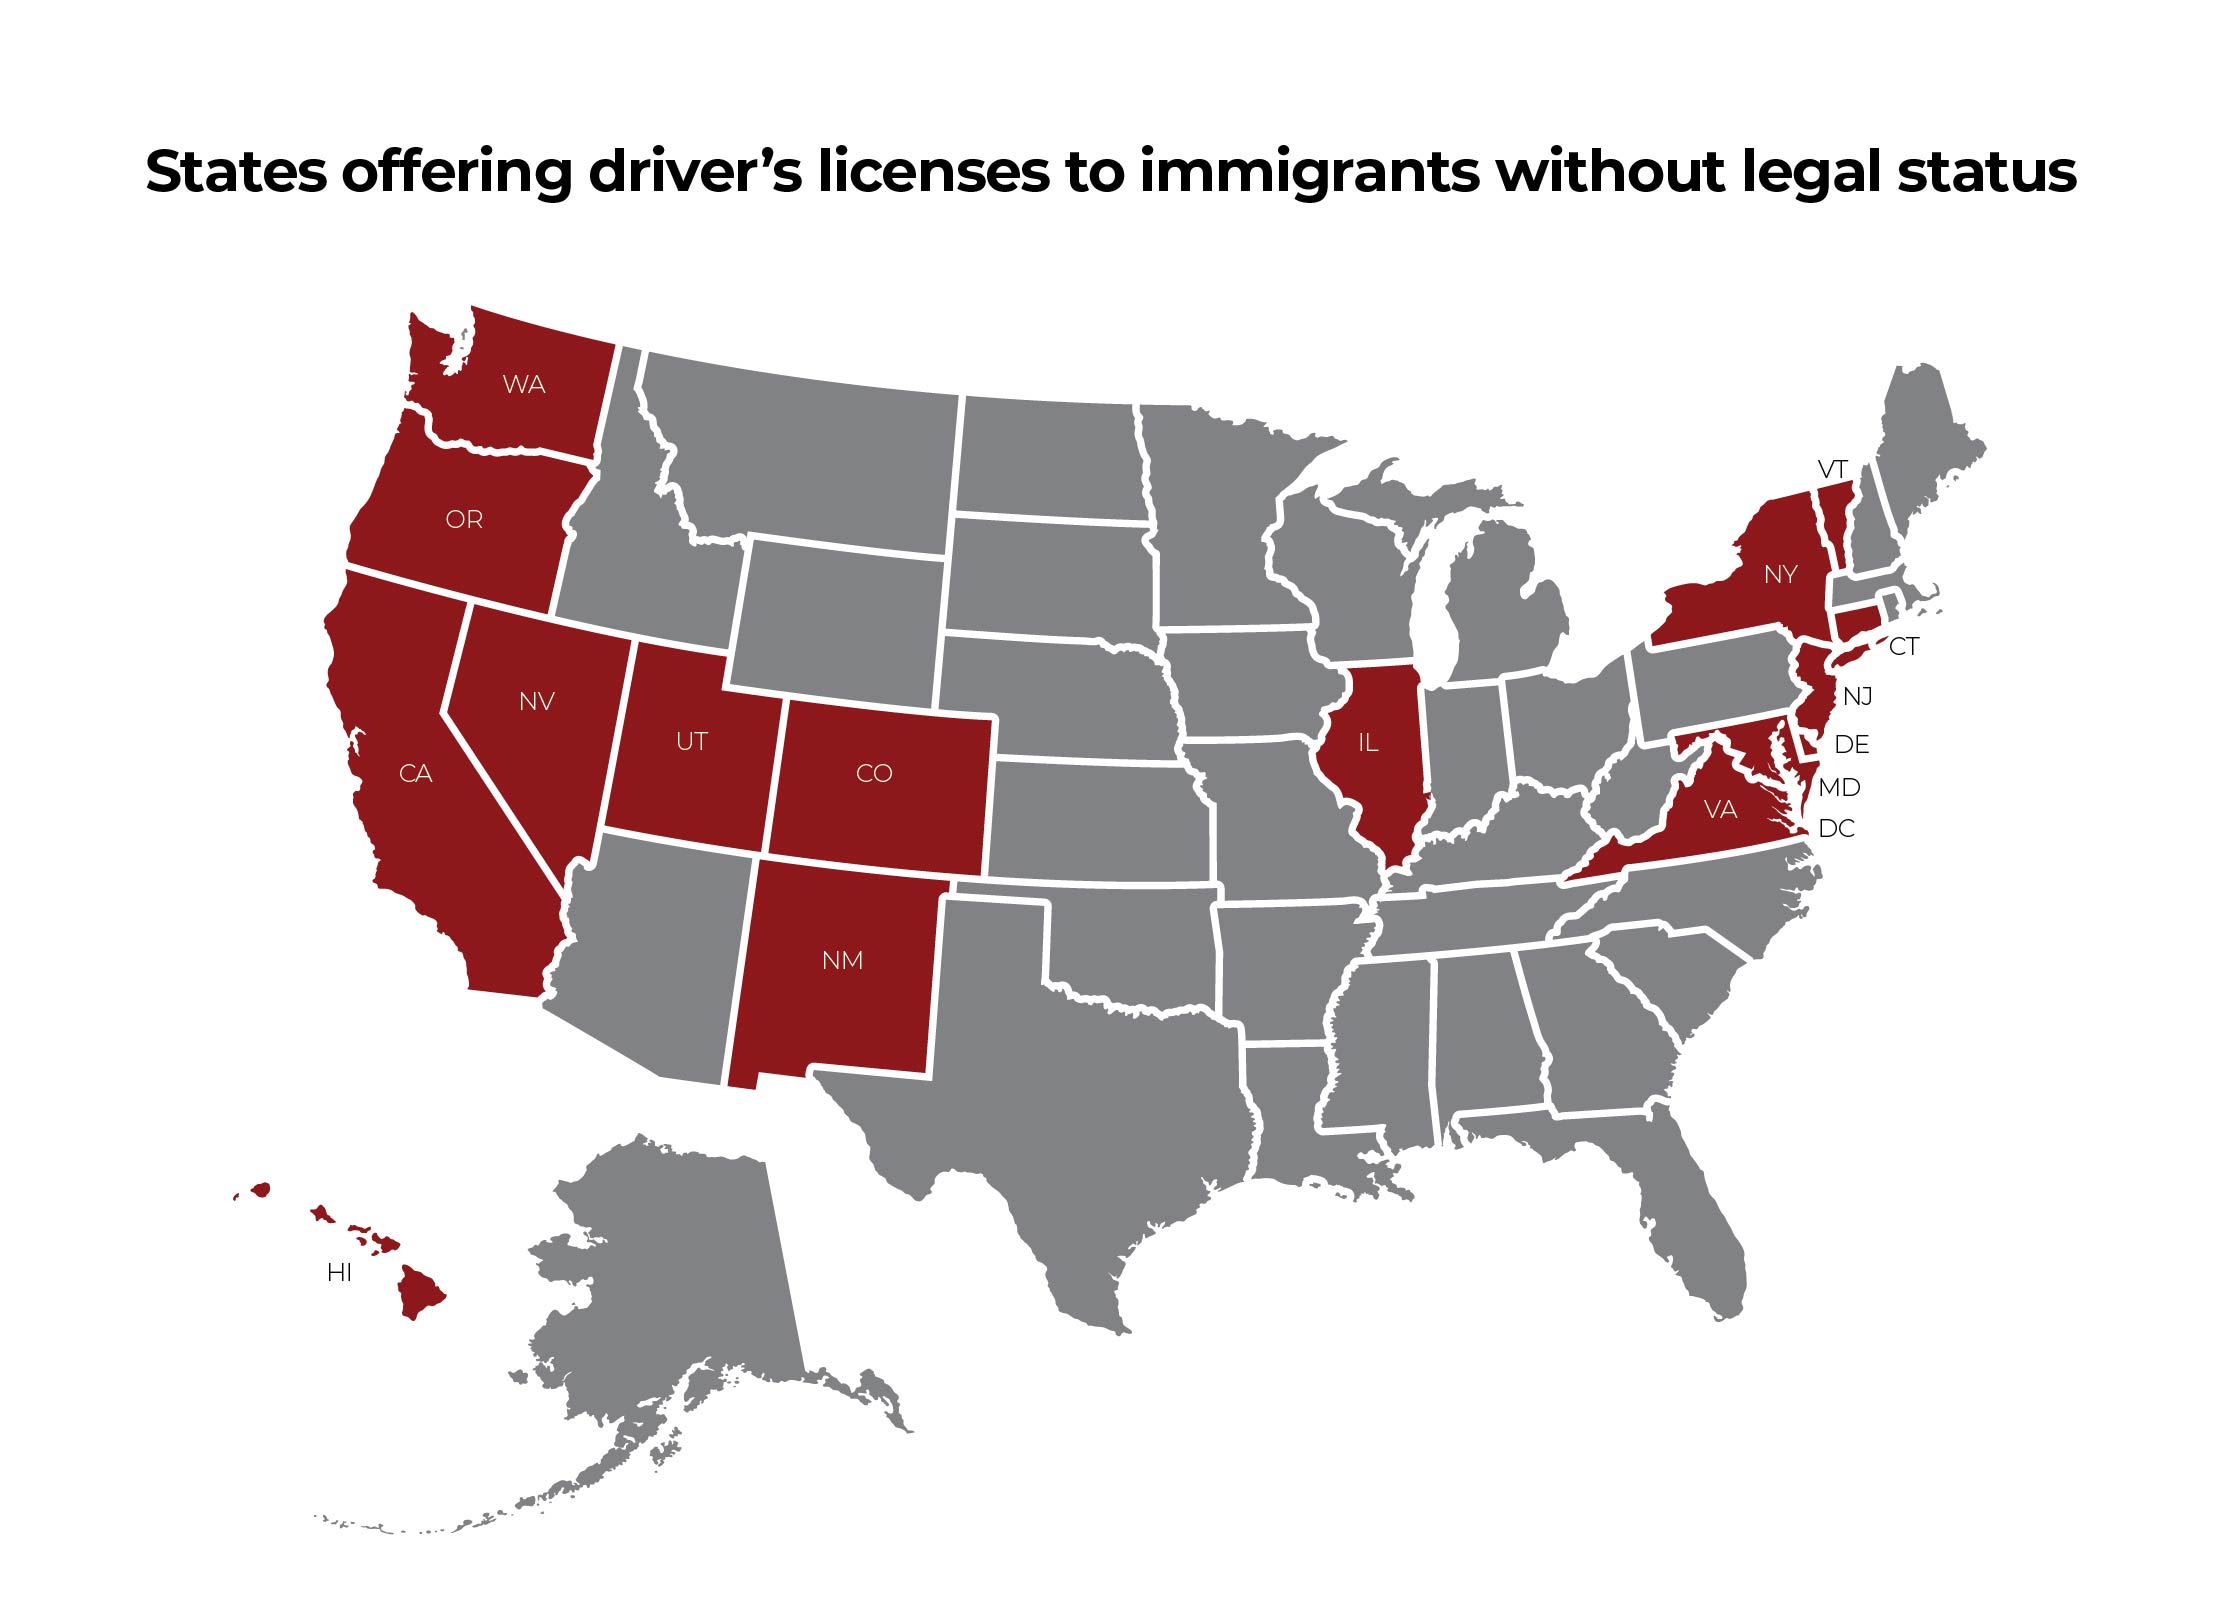 Can unauthorized immigrants legally drive? More states say yes. 